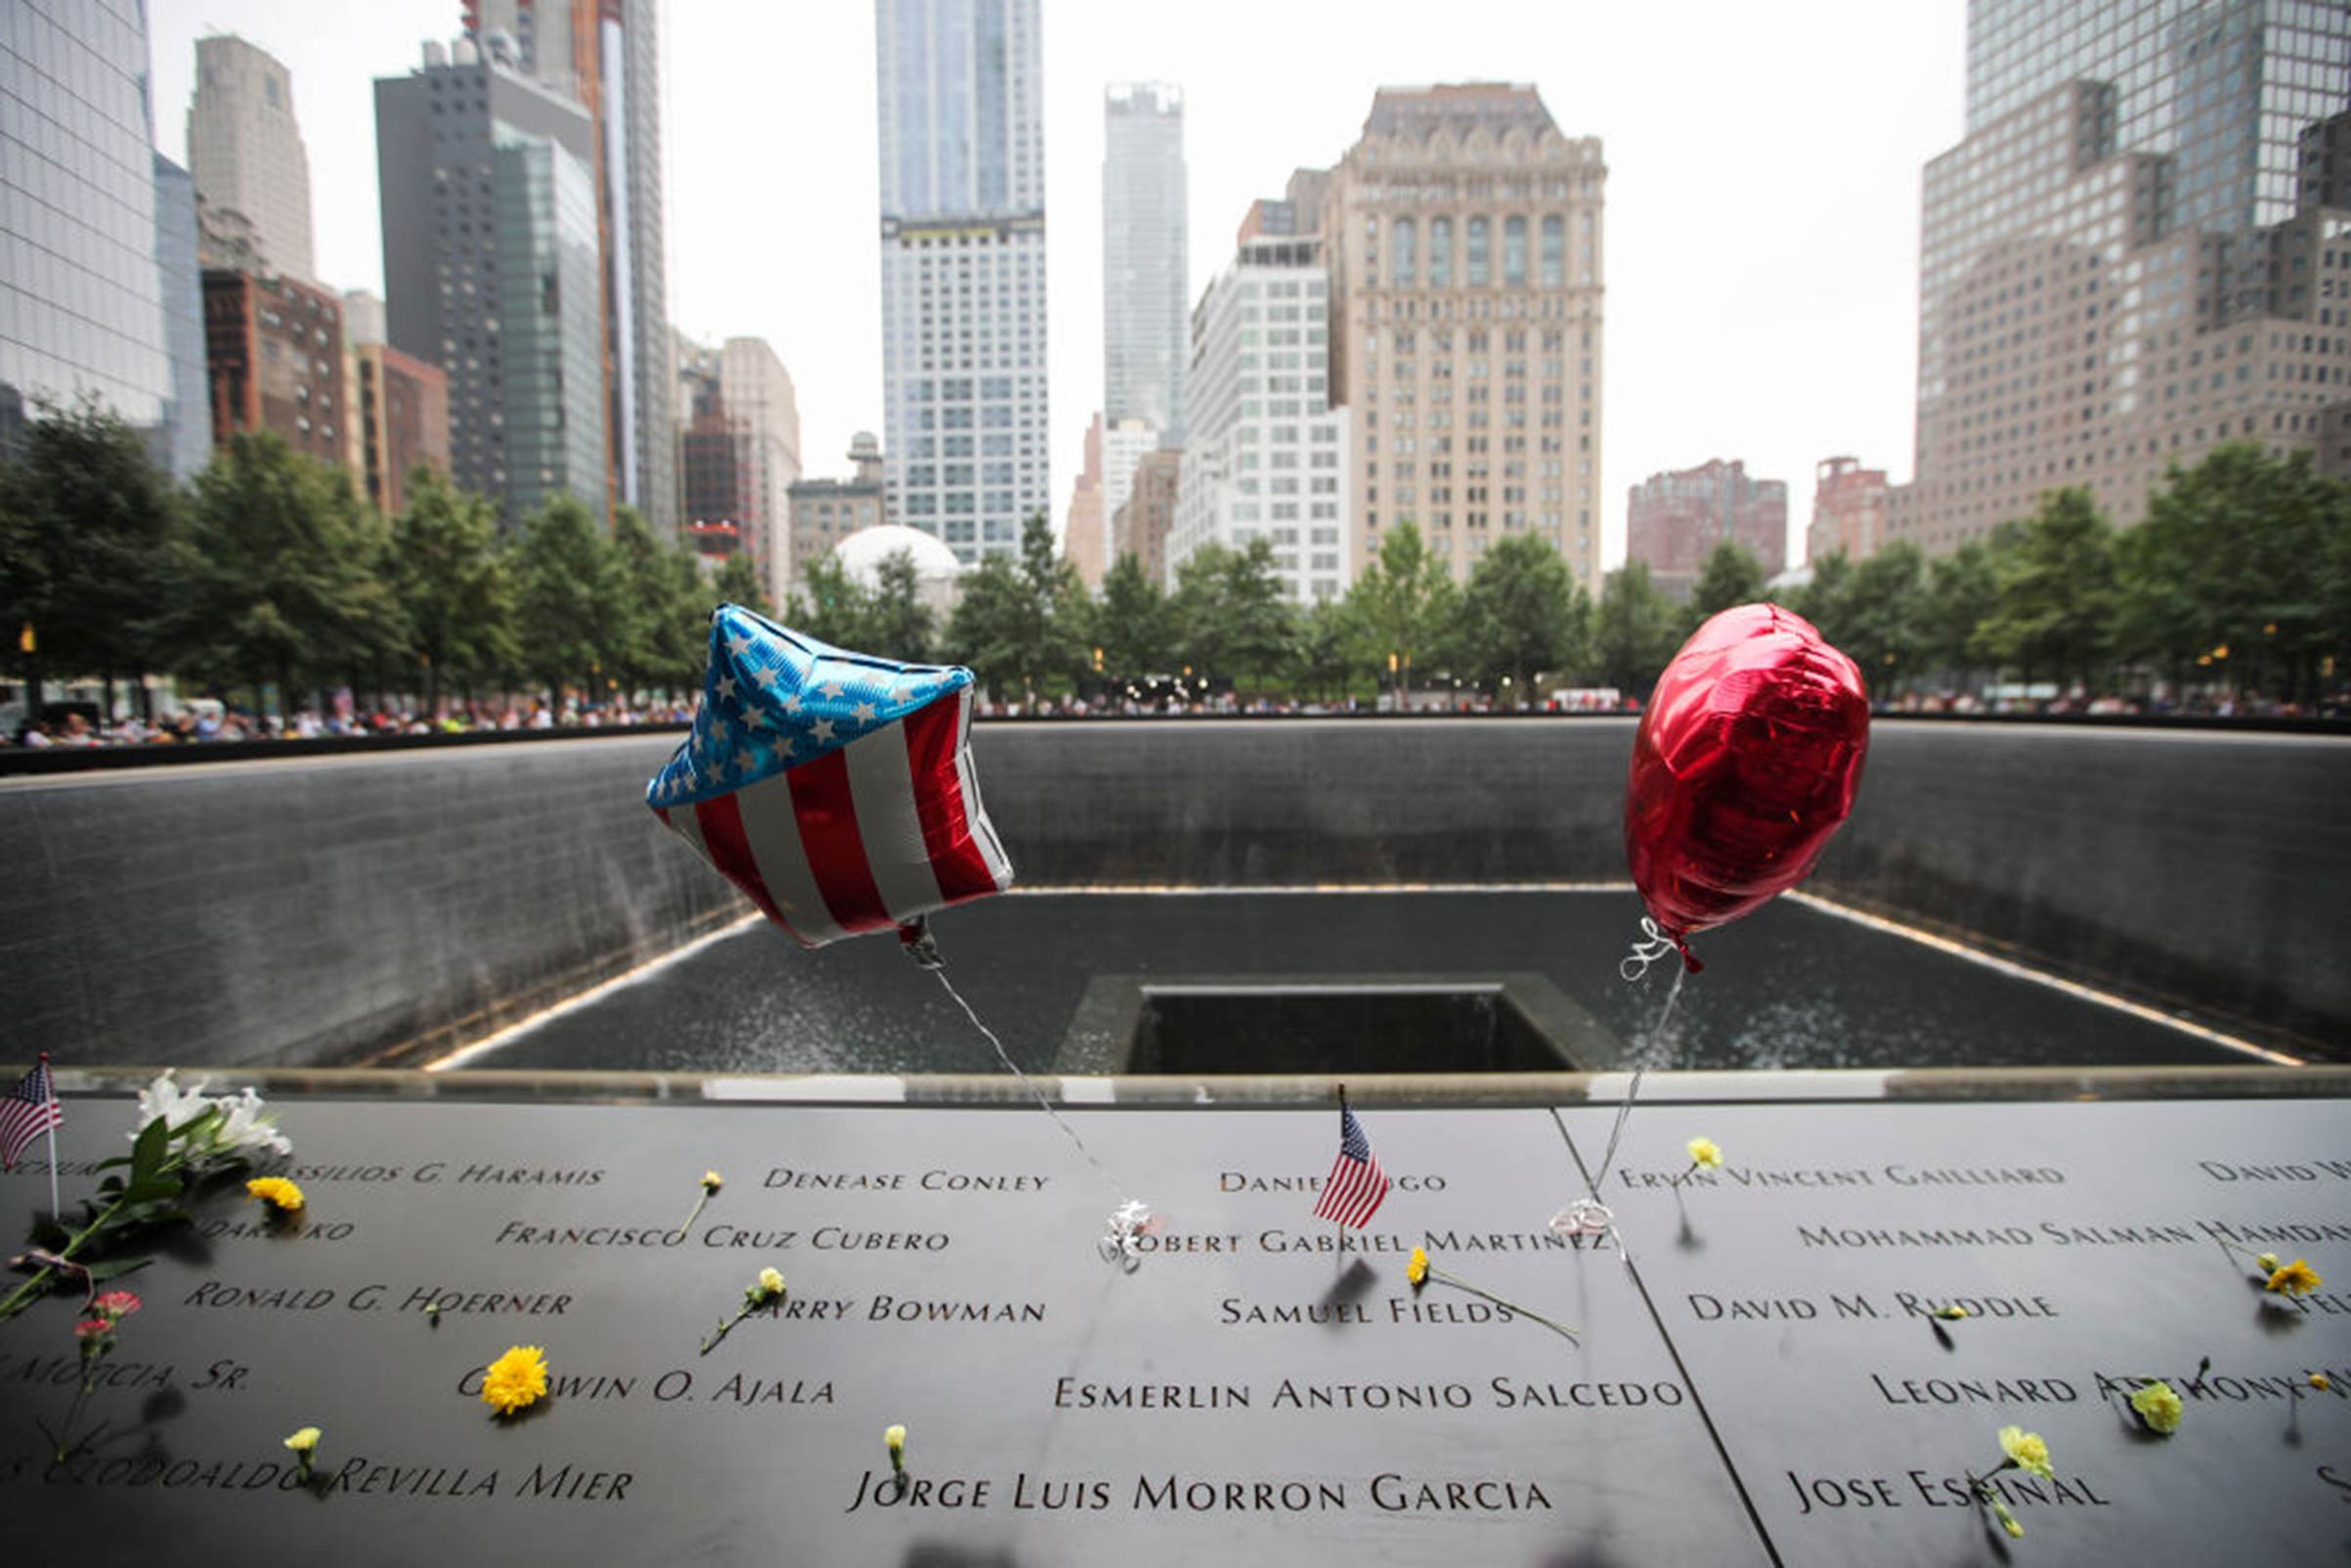 Flowers and balloons are placed on plates on which the names of 9/11 victims were inscribed around the South Pool at the 9/11 Memorial and Museum in New York City on Sept. 11, 2018. (Wang Ying—Xinhua/Getty Images)